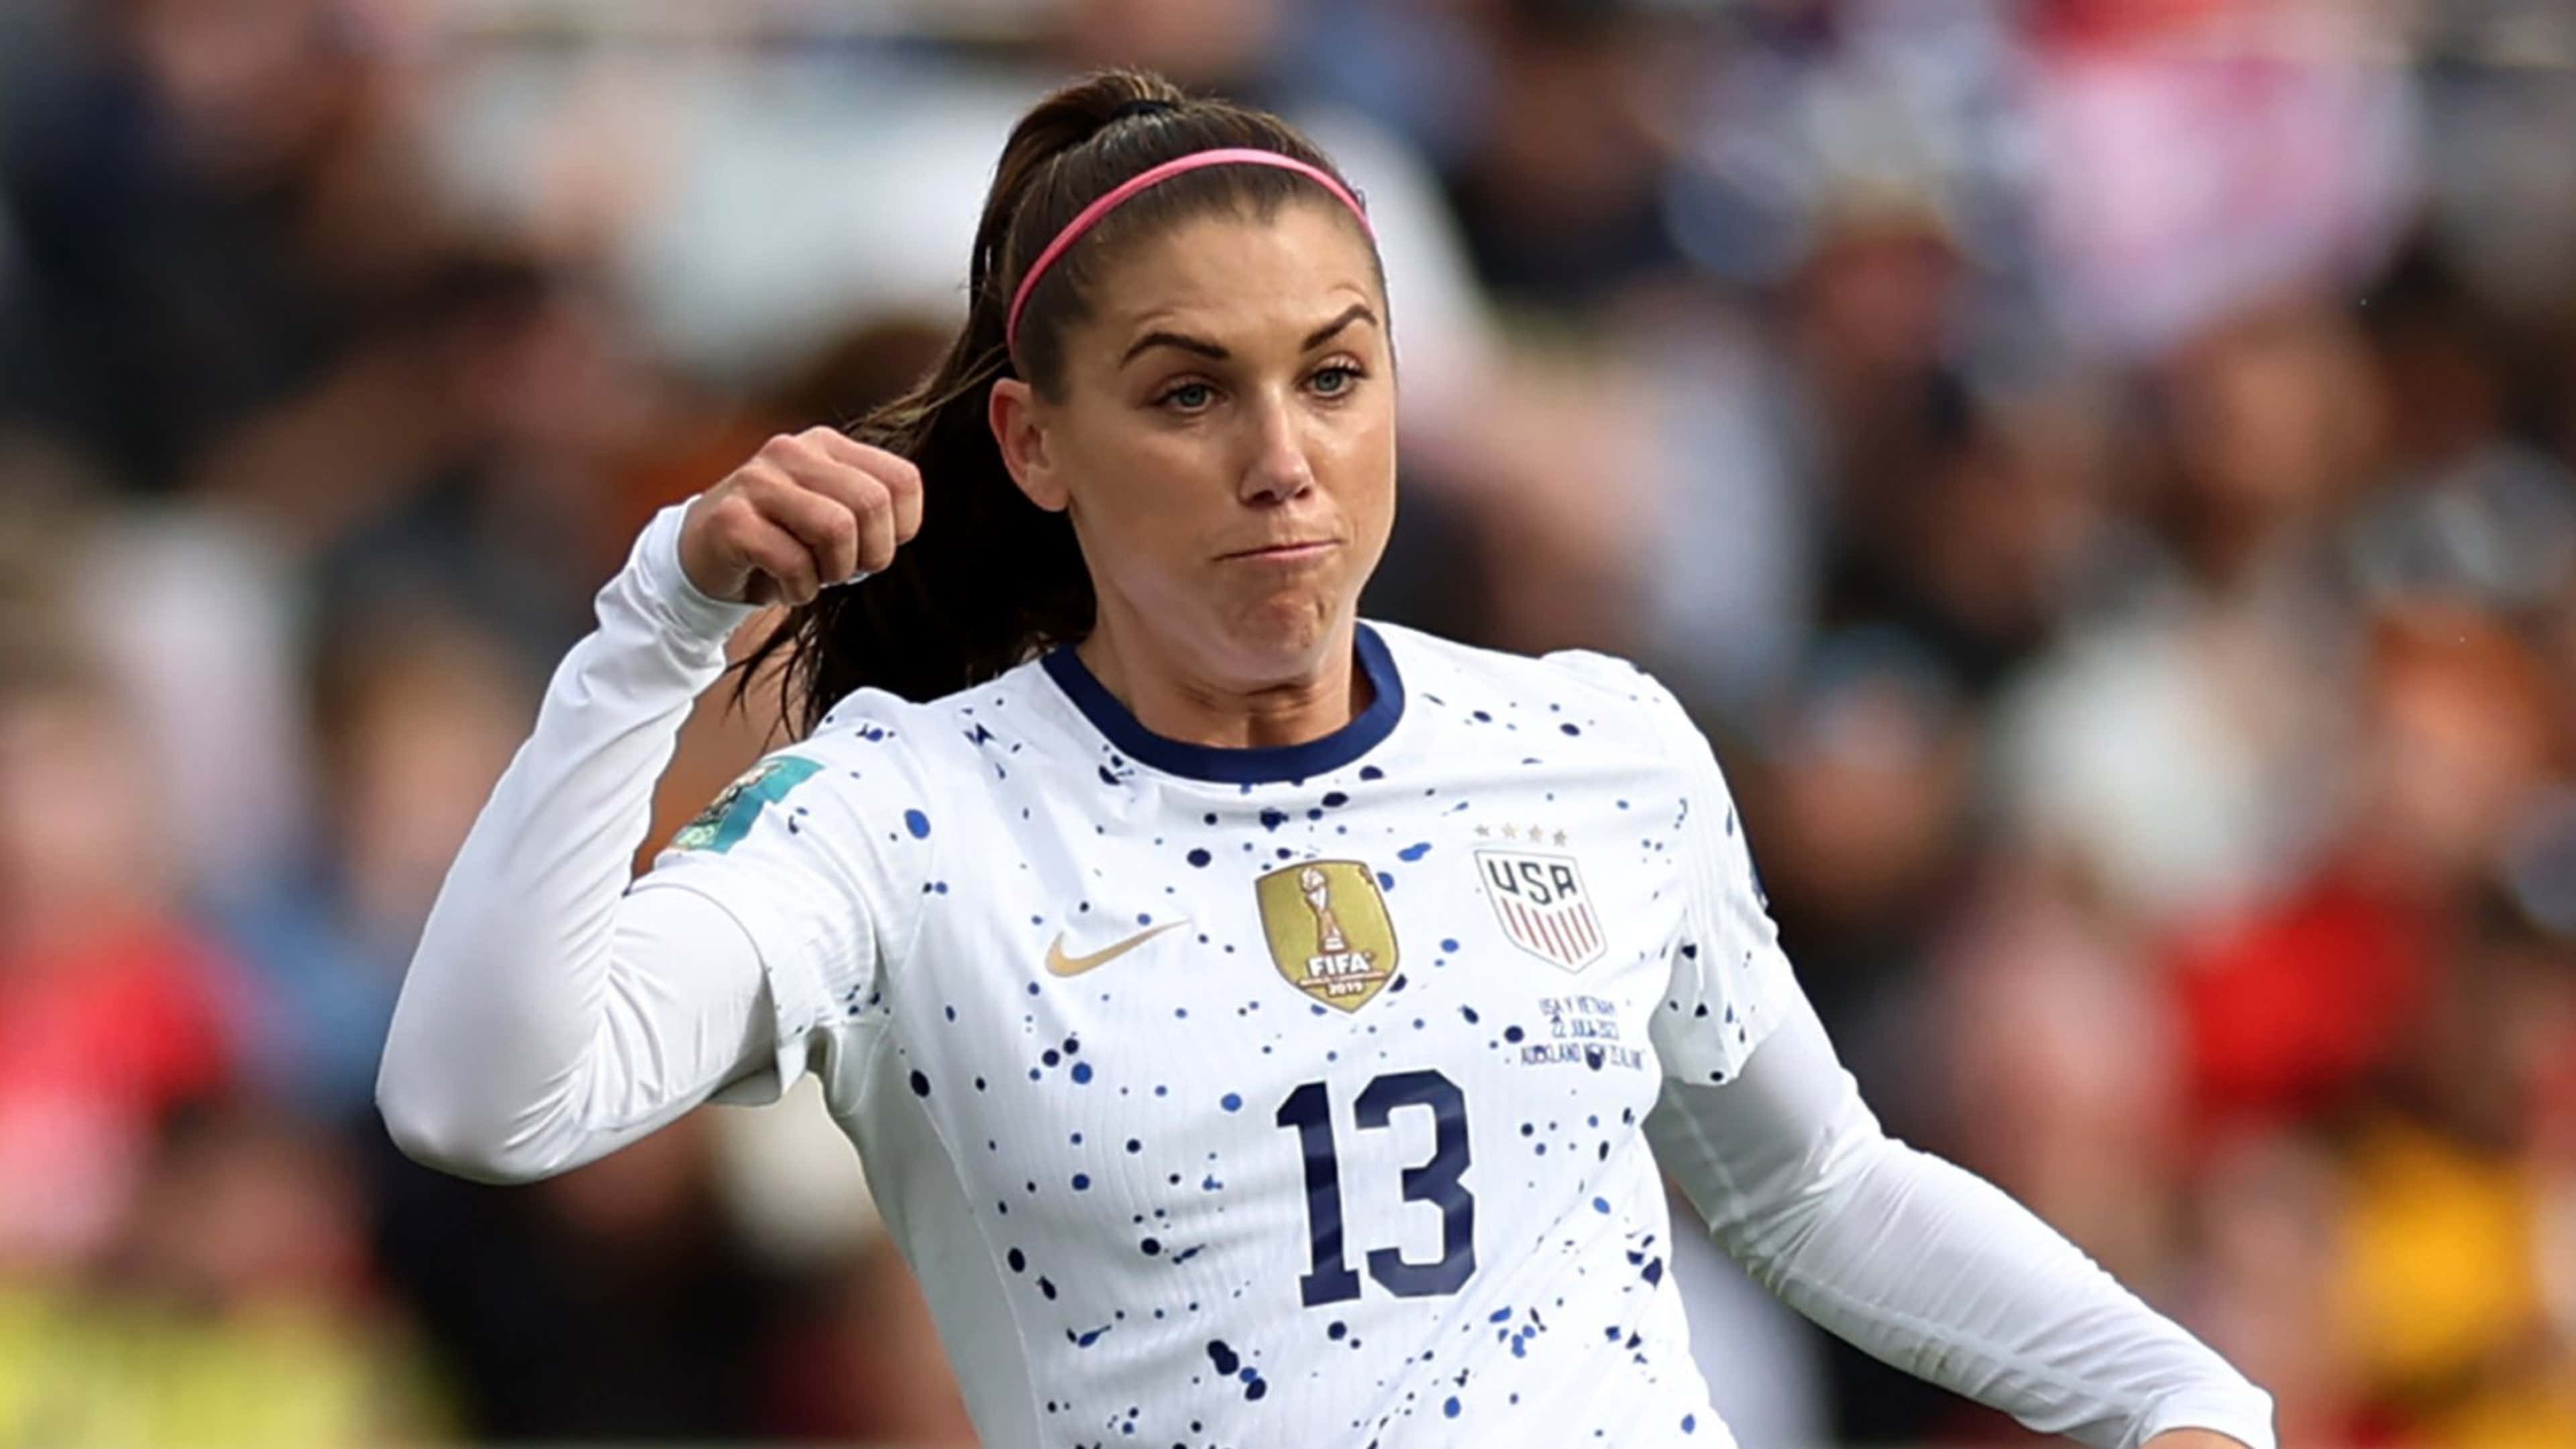 Get a pressed and signed Alex Morgan jersey by heading to our Instagra